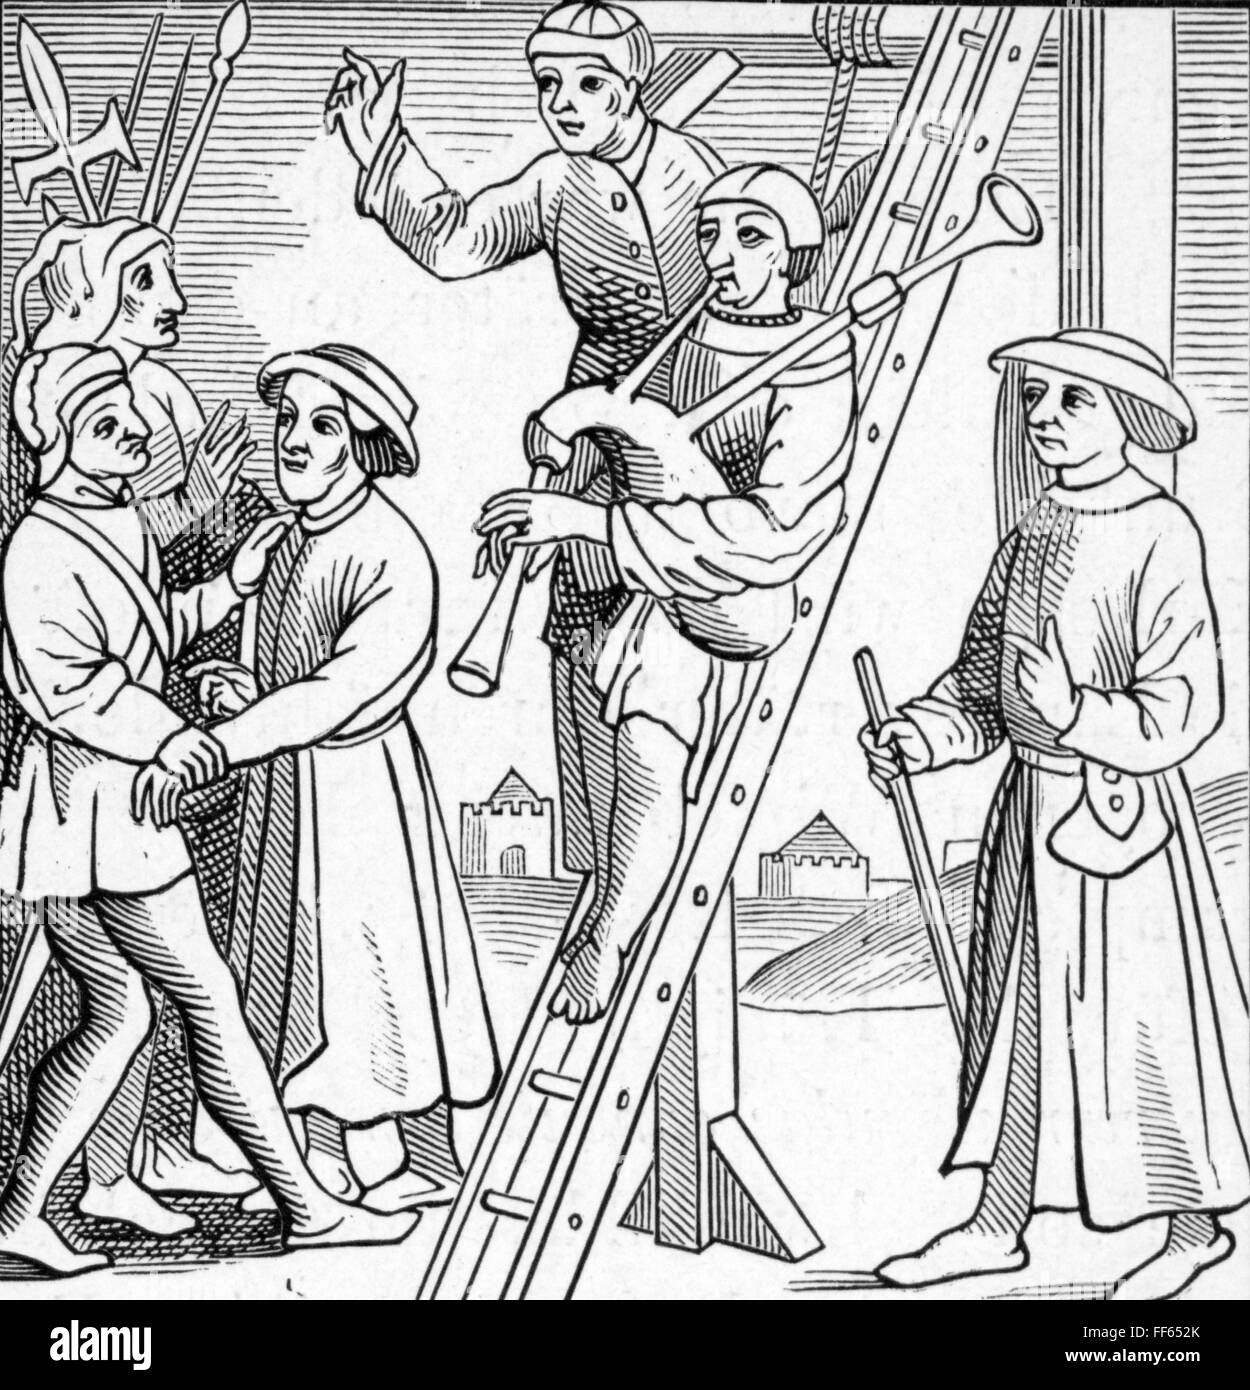 justice,penitentiary system,hanging,a bandsman convicted to deaths says goodbye,a colleague is playing the bagpipes at the gallows,woodcut,Bruges,late 15th century,say goodbye,saying goodbye,says goodbye,said goodbye,hangman,hangmen,hiker,hikers,ladder,ladders,bagpipe,musician,musicians,death penalty,punishment,punishments,musical instrument,instrument,musical instruments,instruments,Middle Ages,Flanders,Belgium,Holy Roman Empire,people,group,groups,hanging,hang,bandsman,bandsmen,taking,you take,takes,took,taken,would,Additional-Rights-Clearences-Not Available Stock Photo